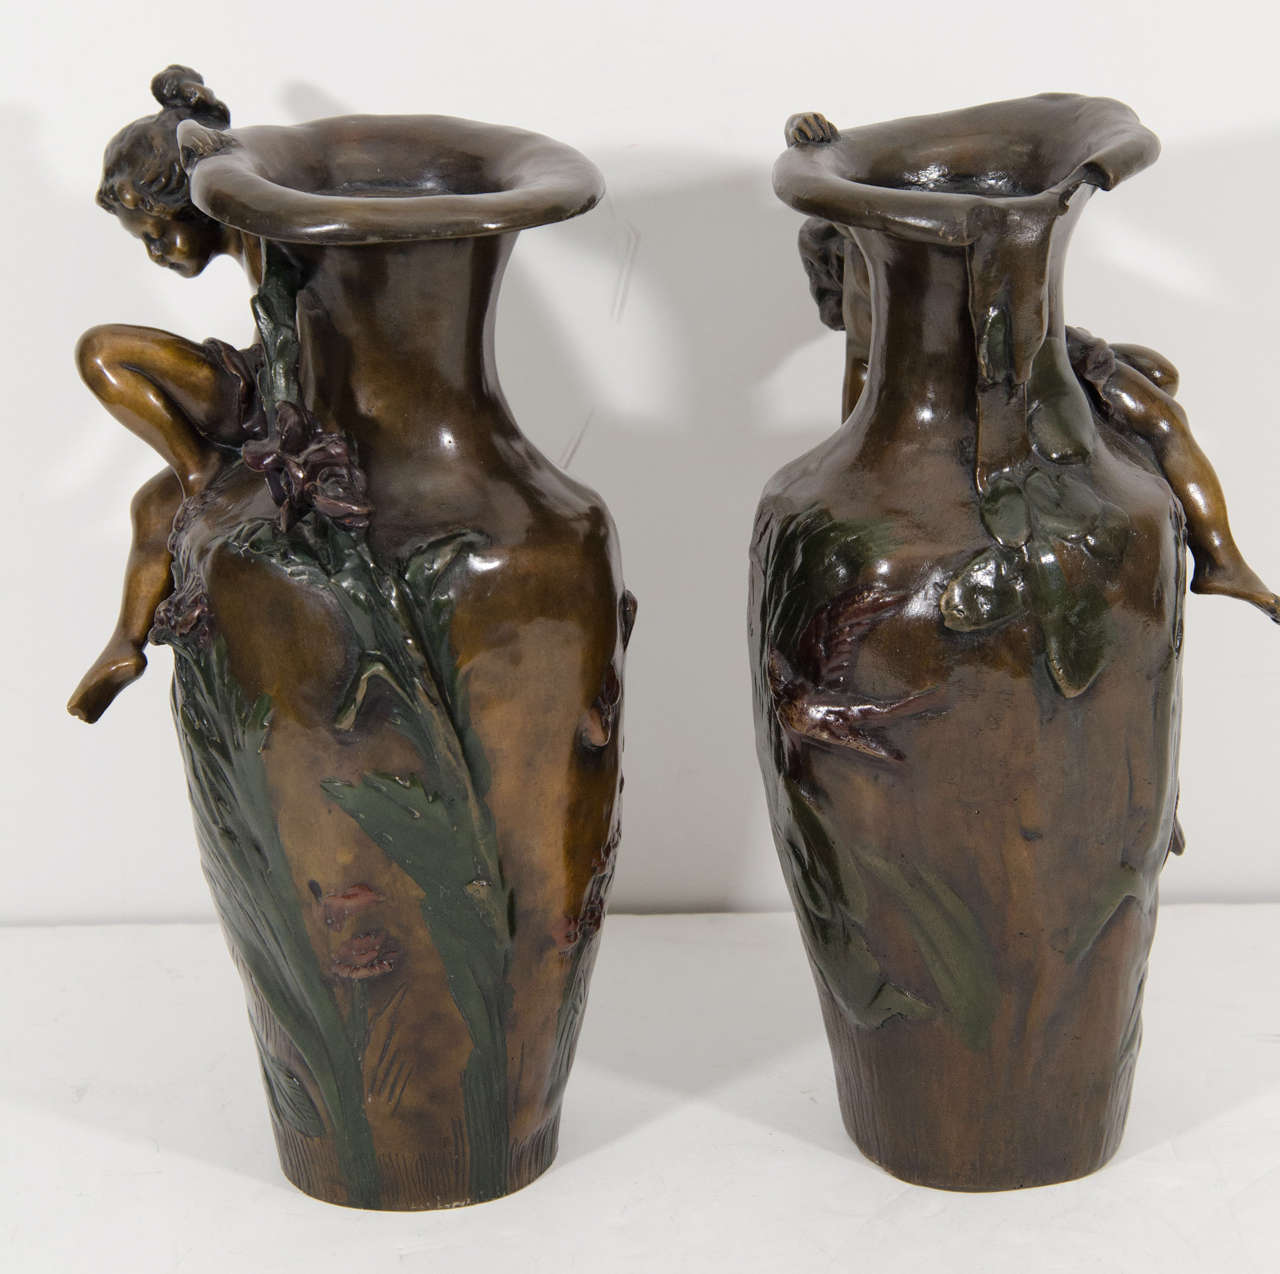 A pair of bronze vases with raised dragonflies, foliage and cherub Figures. Signed Auguste Moreau